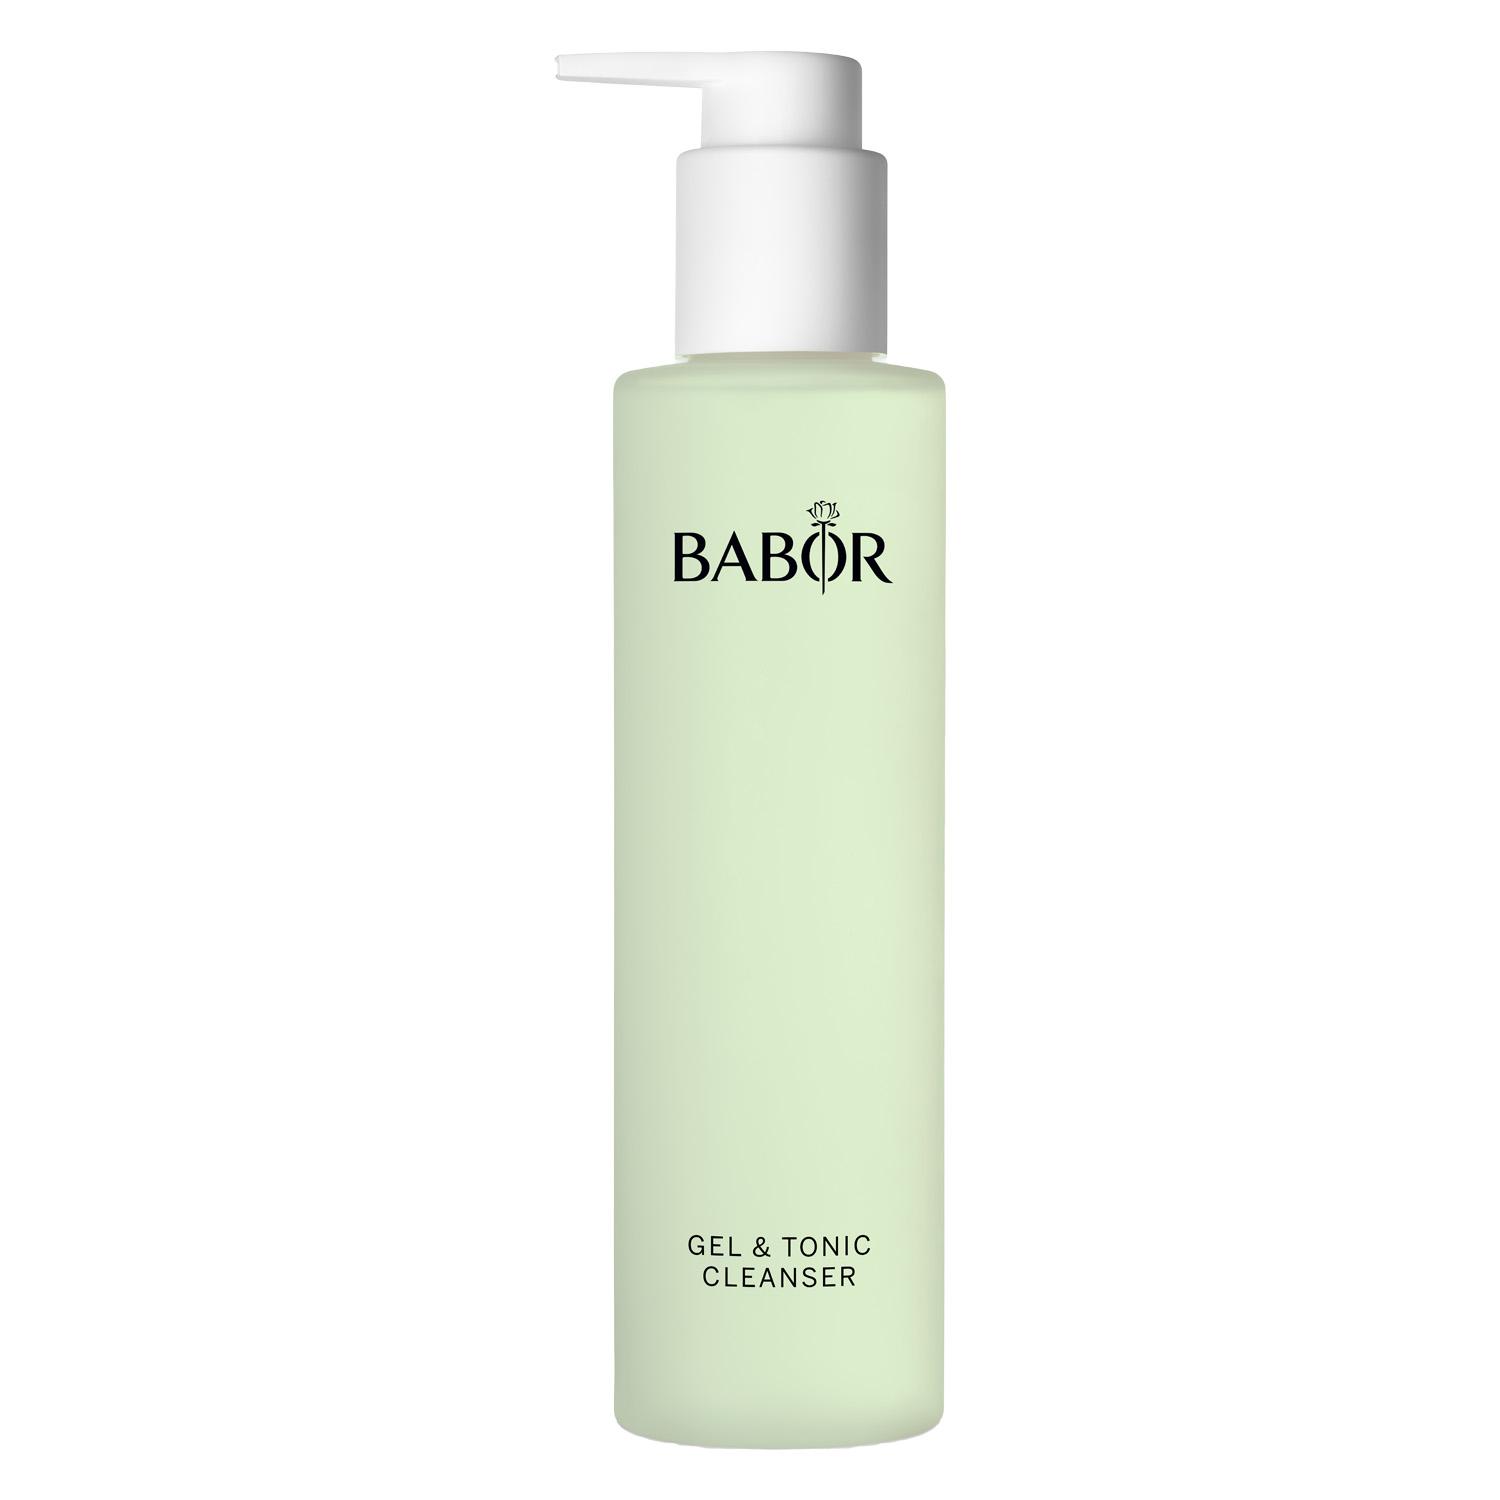 BABOR CLEANSING - 2in1 Gel & Tonic